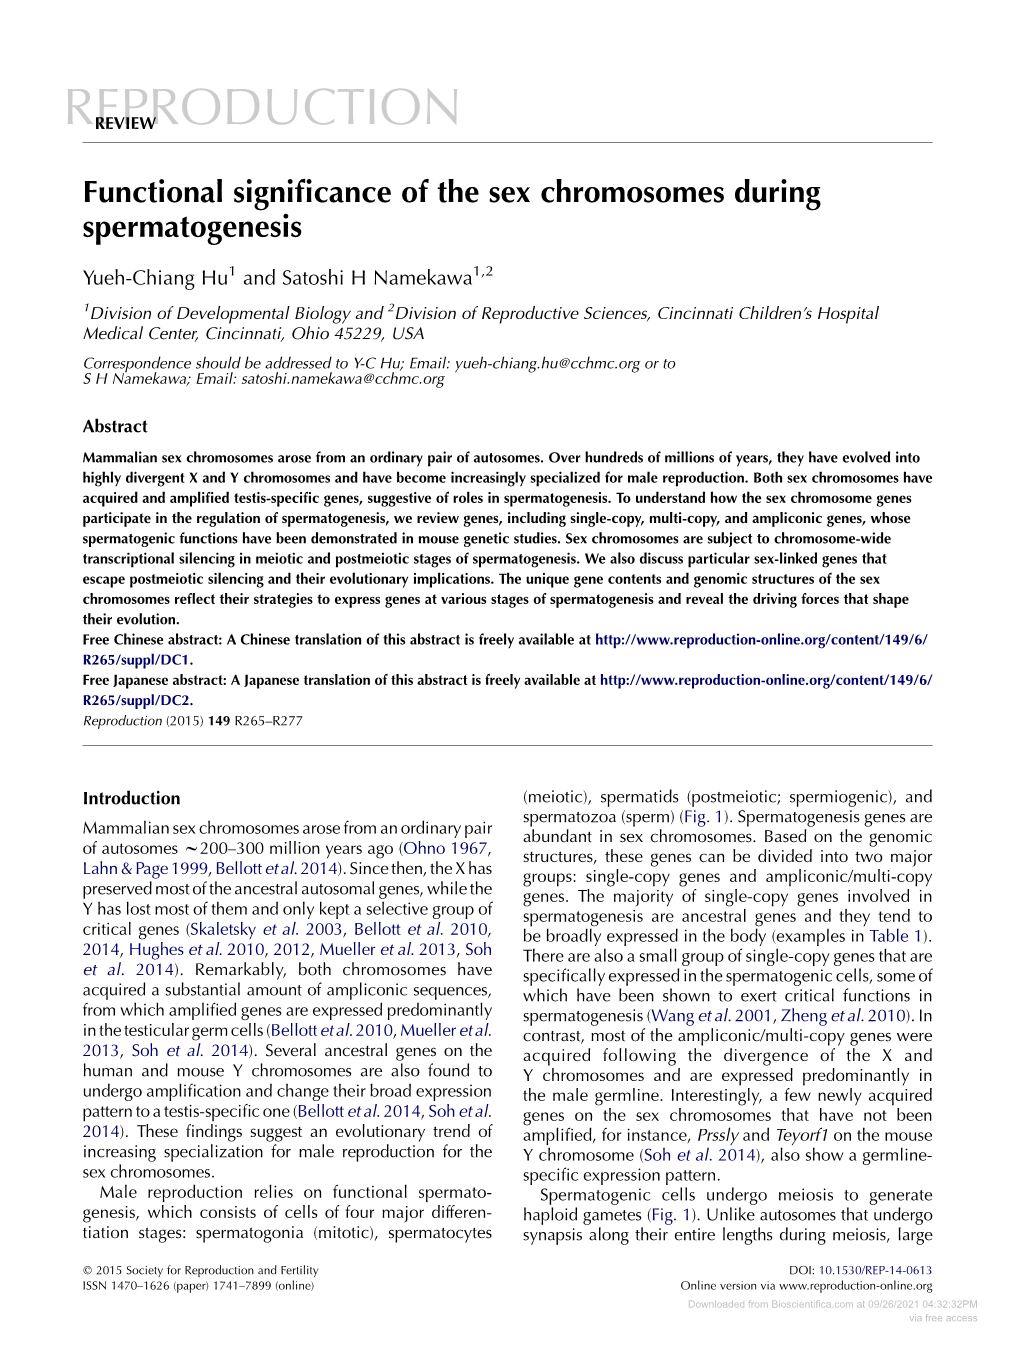 Functional Significance of the Sex Chromosomes During